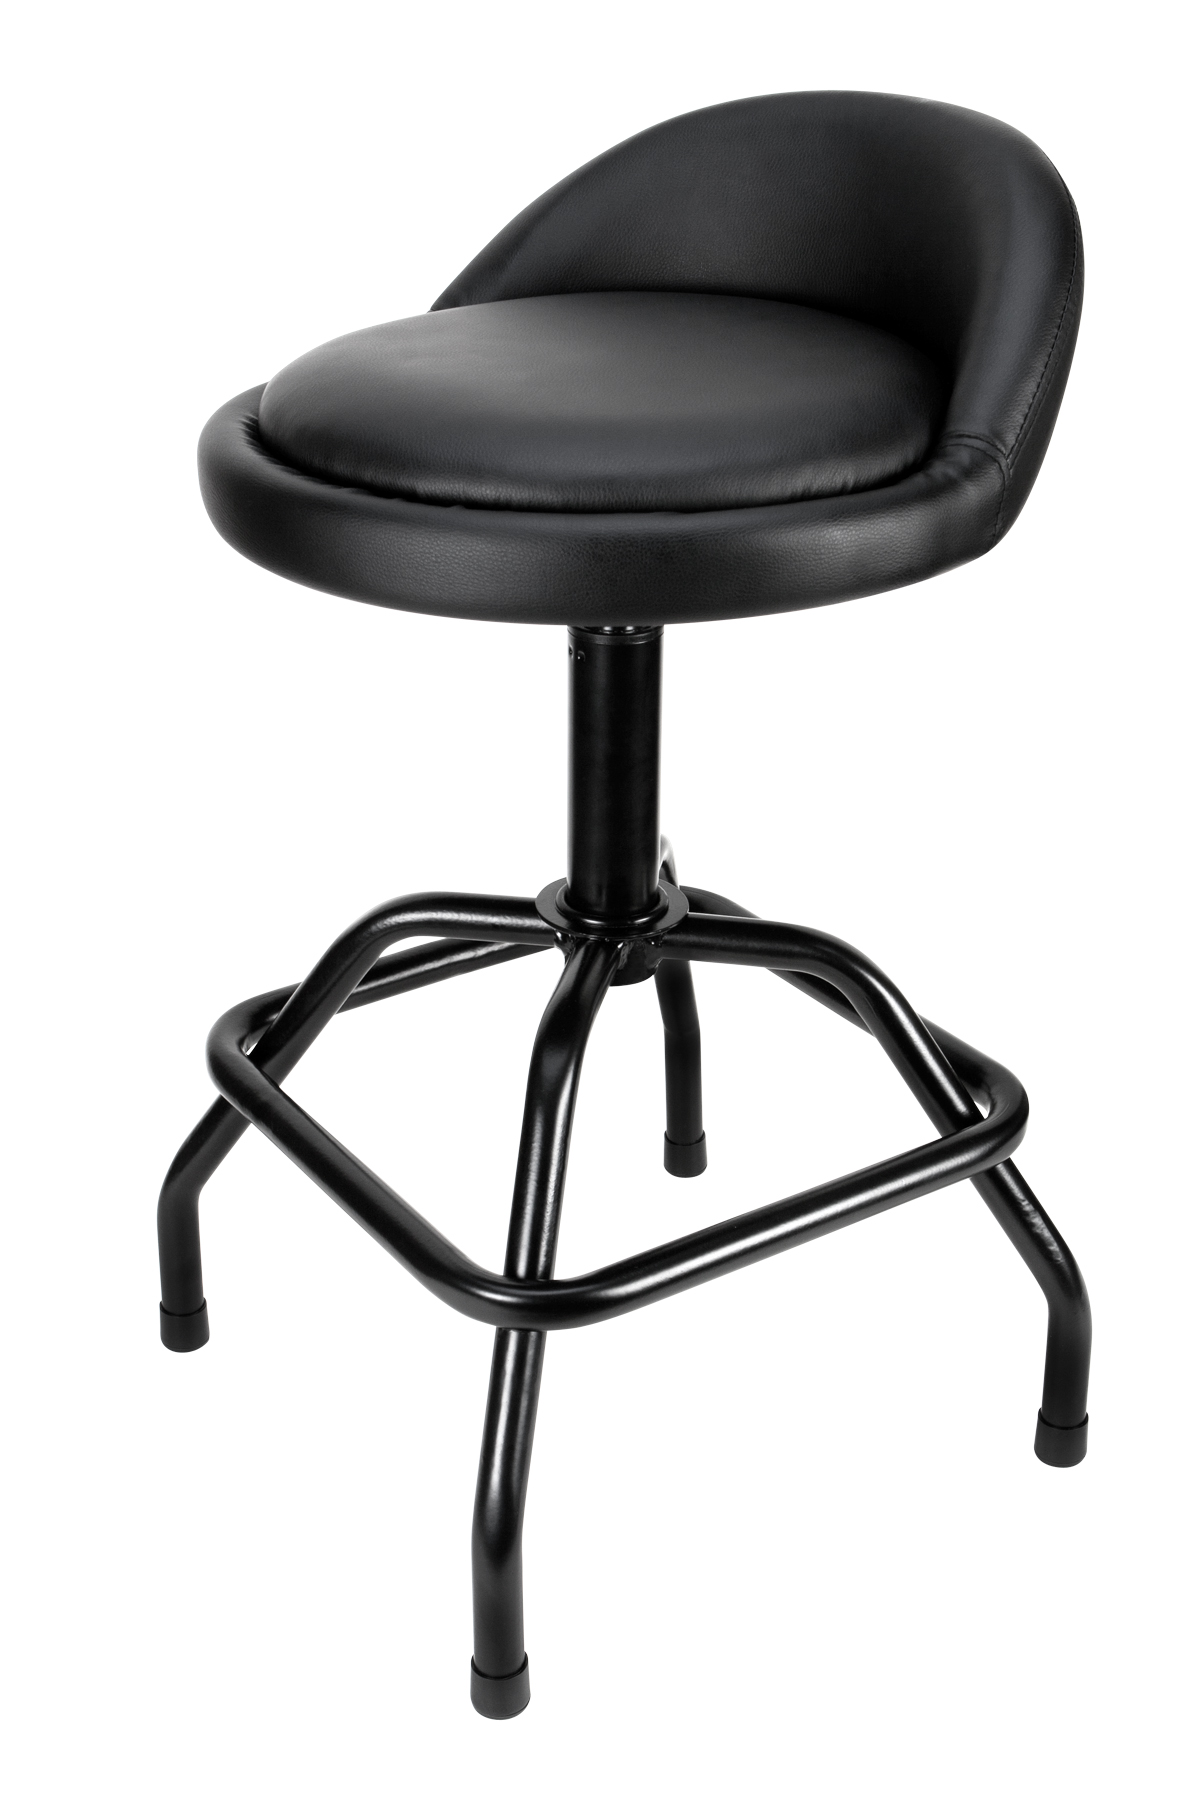 Performance Tools PTW85011 PNEUMATIC BAR STOOL WITH SWIVEL SEAT - MPR Tools & Equipment